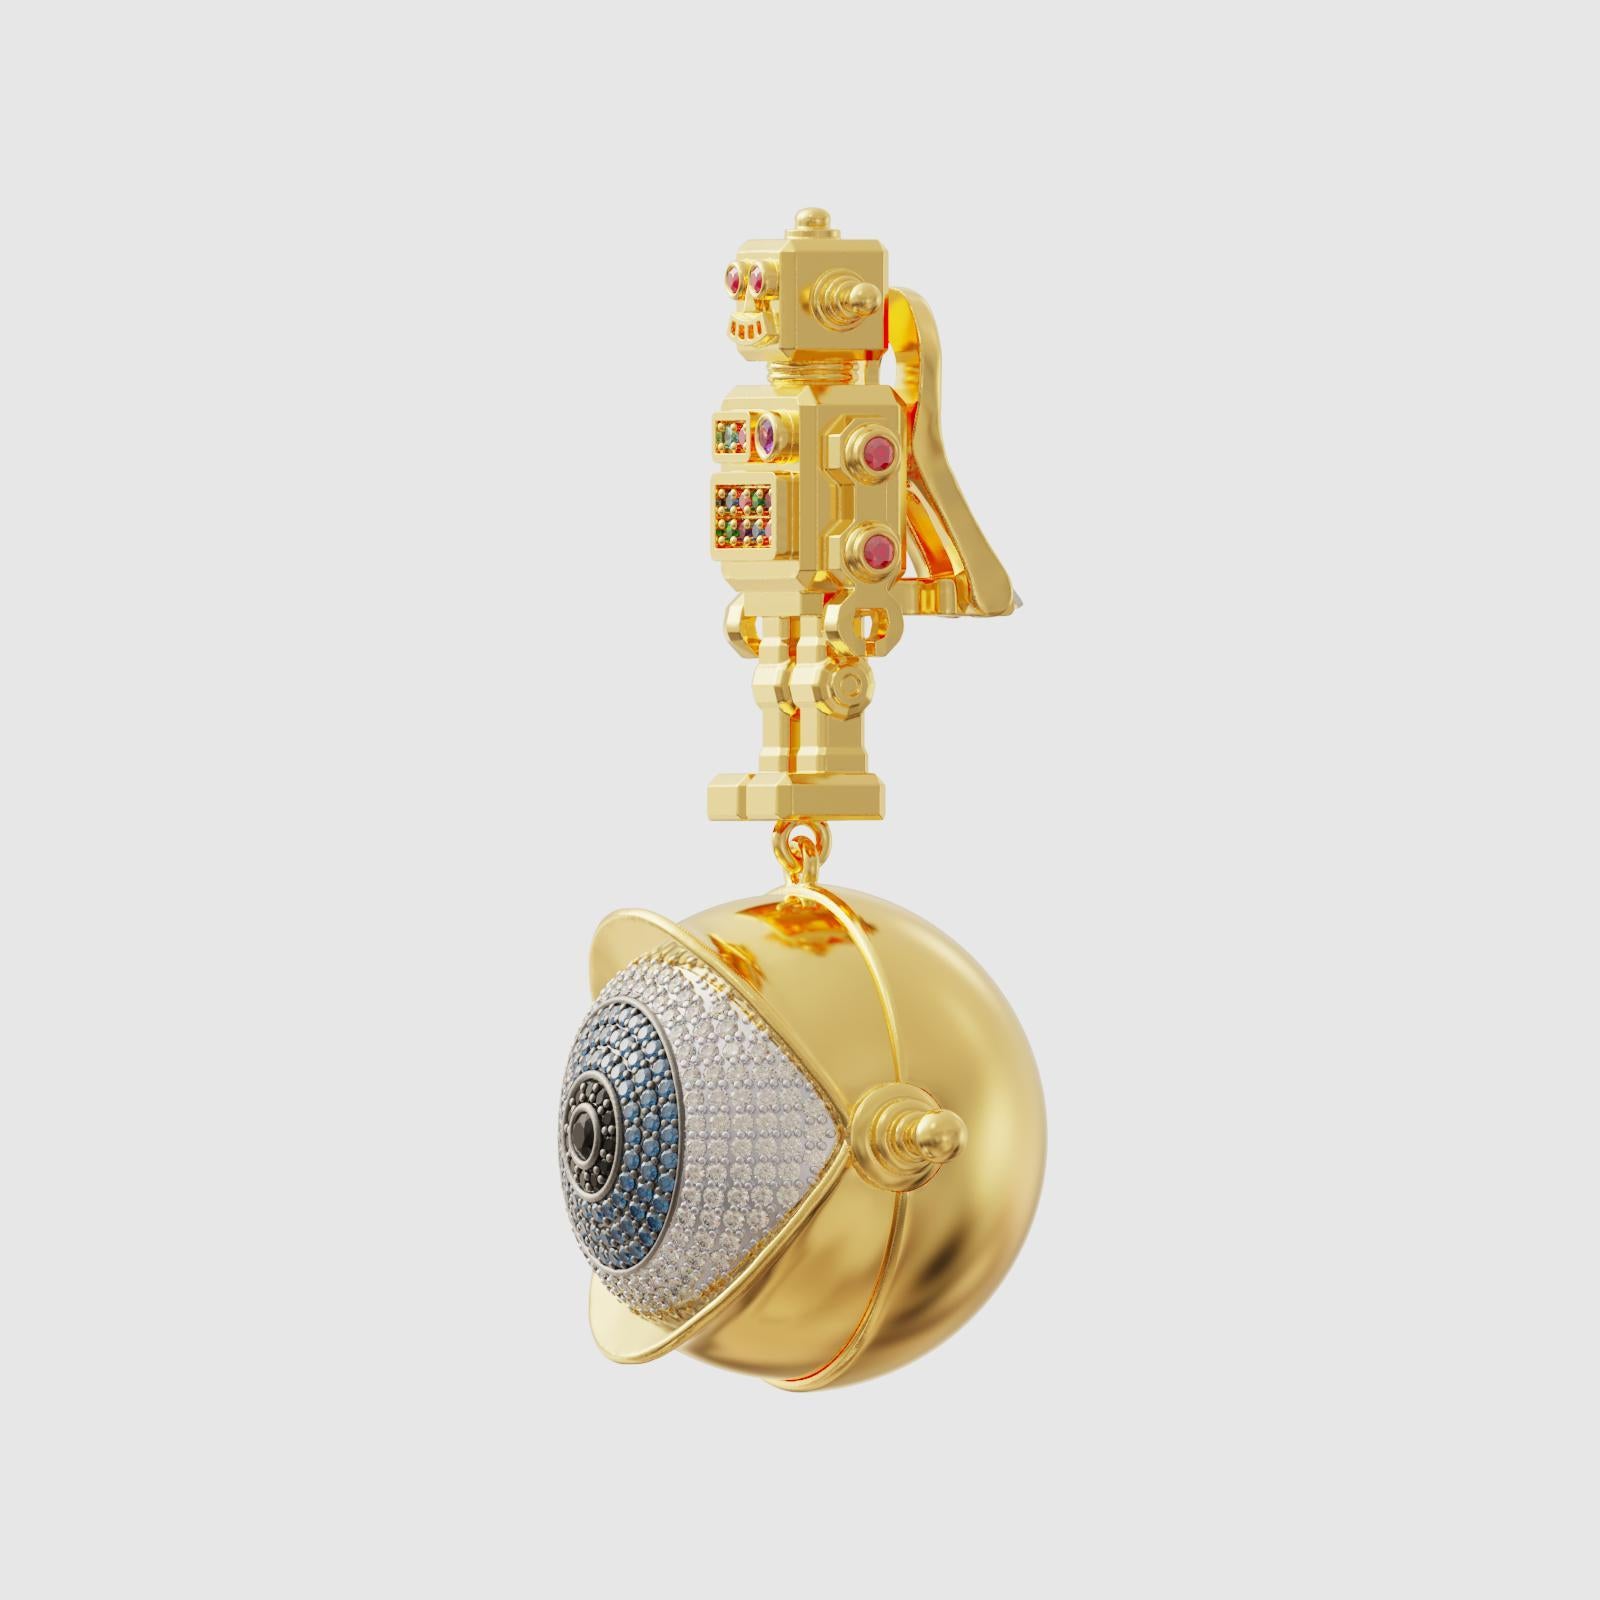 The evil eye bead has timeless protection. And every soul needs it. A robot designed in vintage style displays your special taste, while the evil eye bead continues a tradition dating back thousands of years.

With this piece that will add